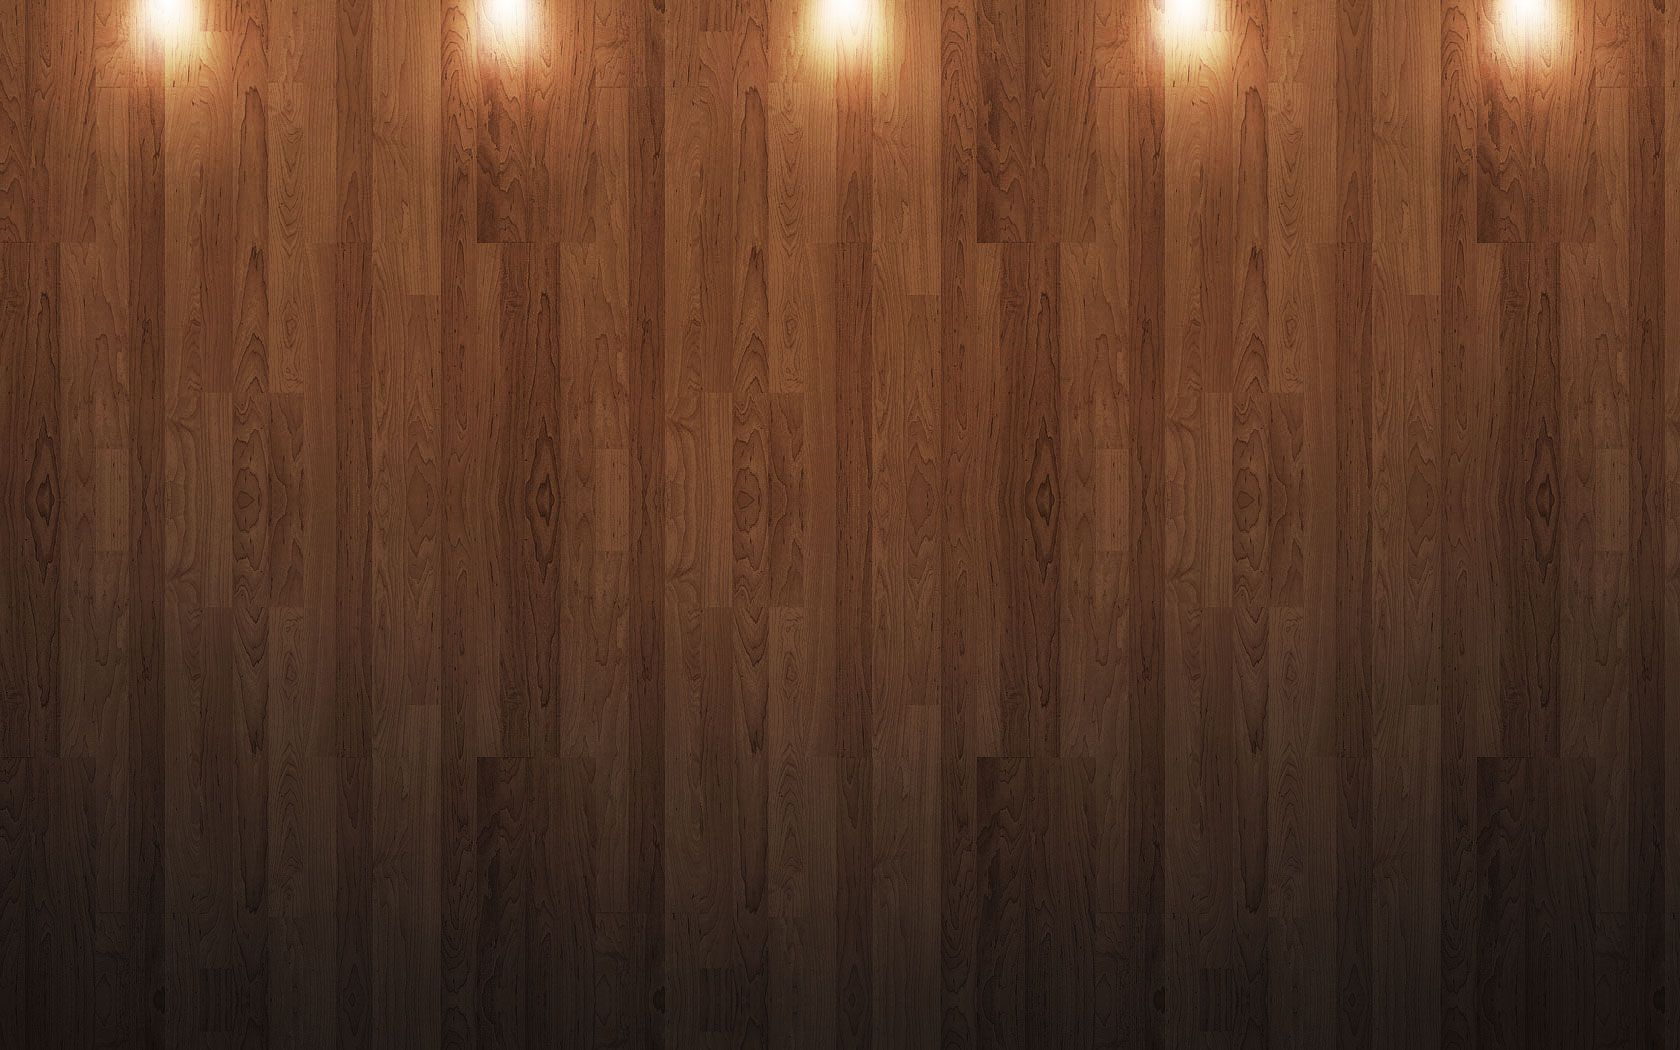 Full HD Wallpapers Backgrounds, Wood, Spotlights, Brown, by